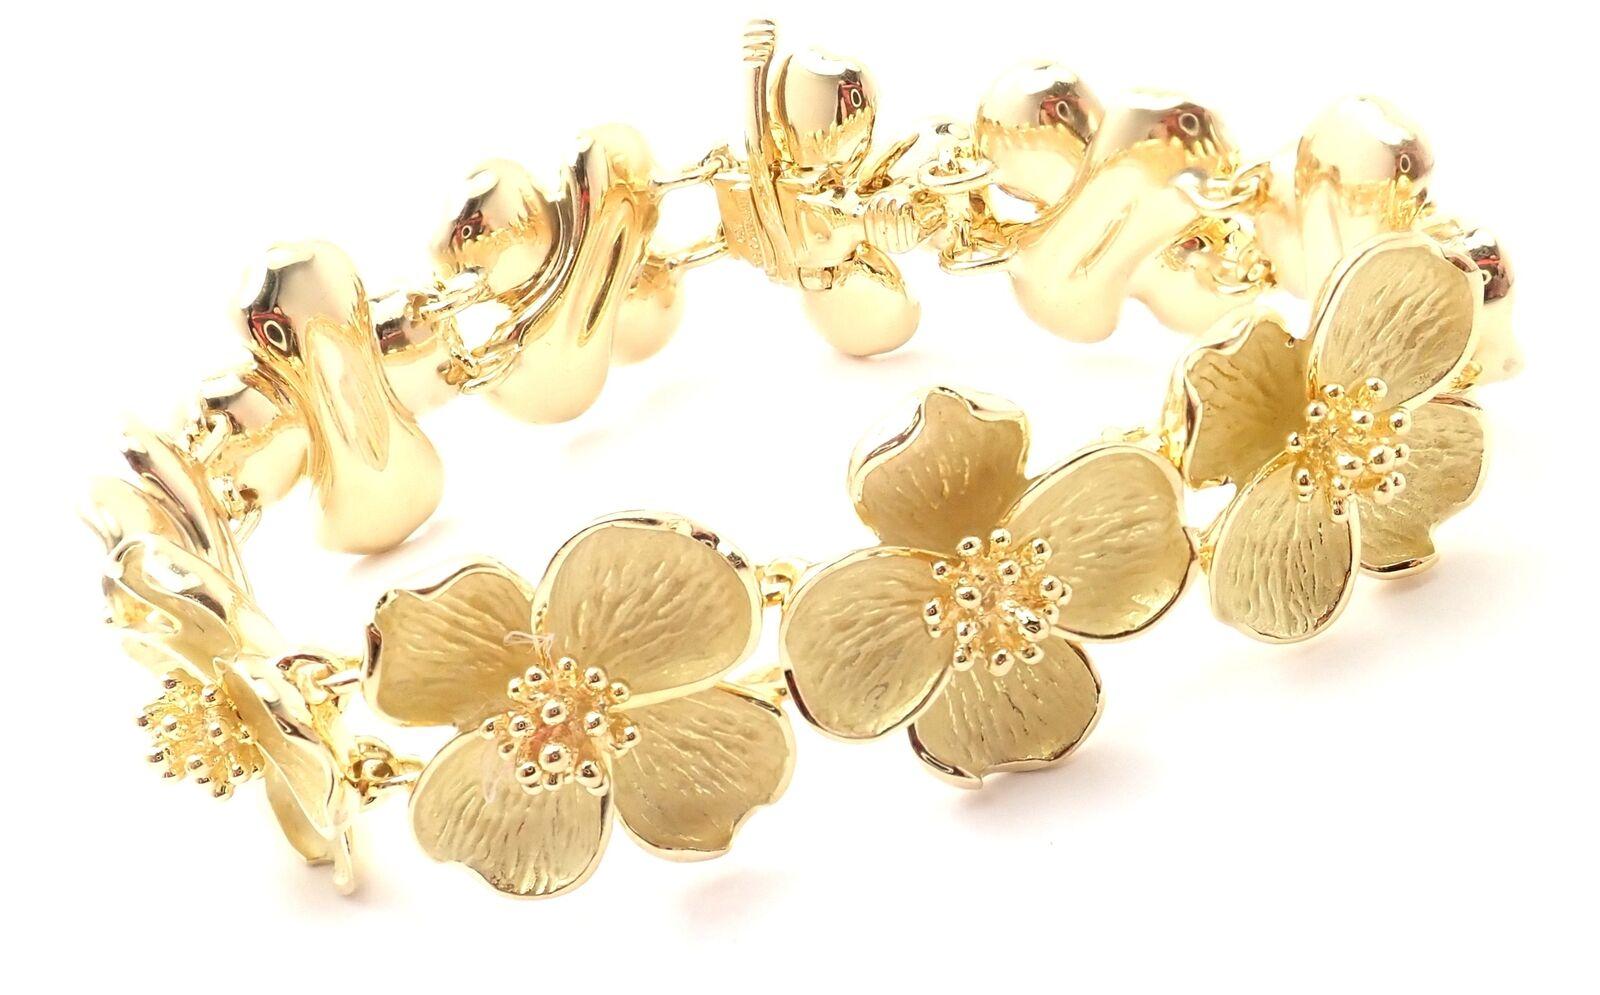 18k Yellow Gold Vintage Dogwood Flower Link Bracelet by Tiffany & Co.
Details:
Weight: 52.8 grams
Length: 7